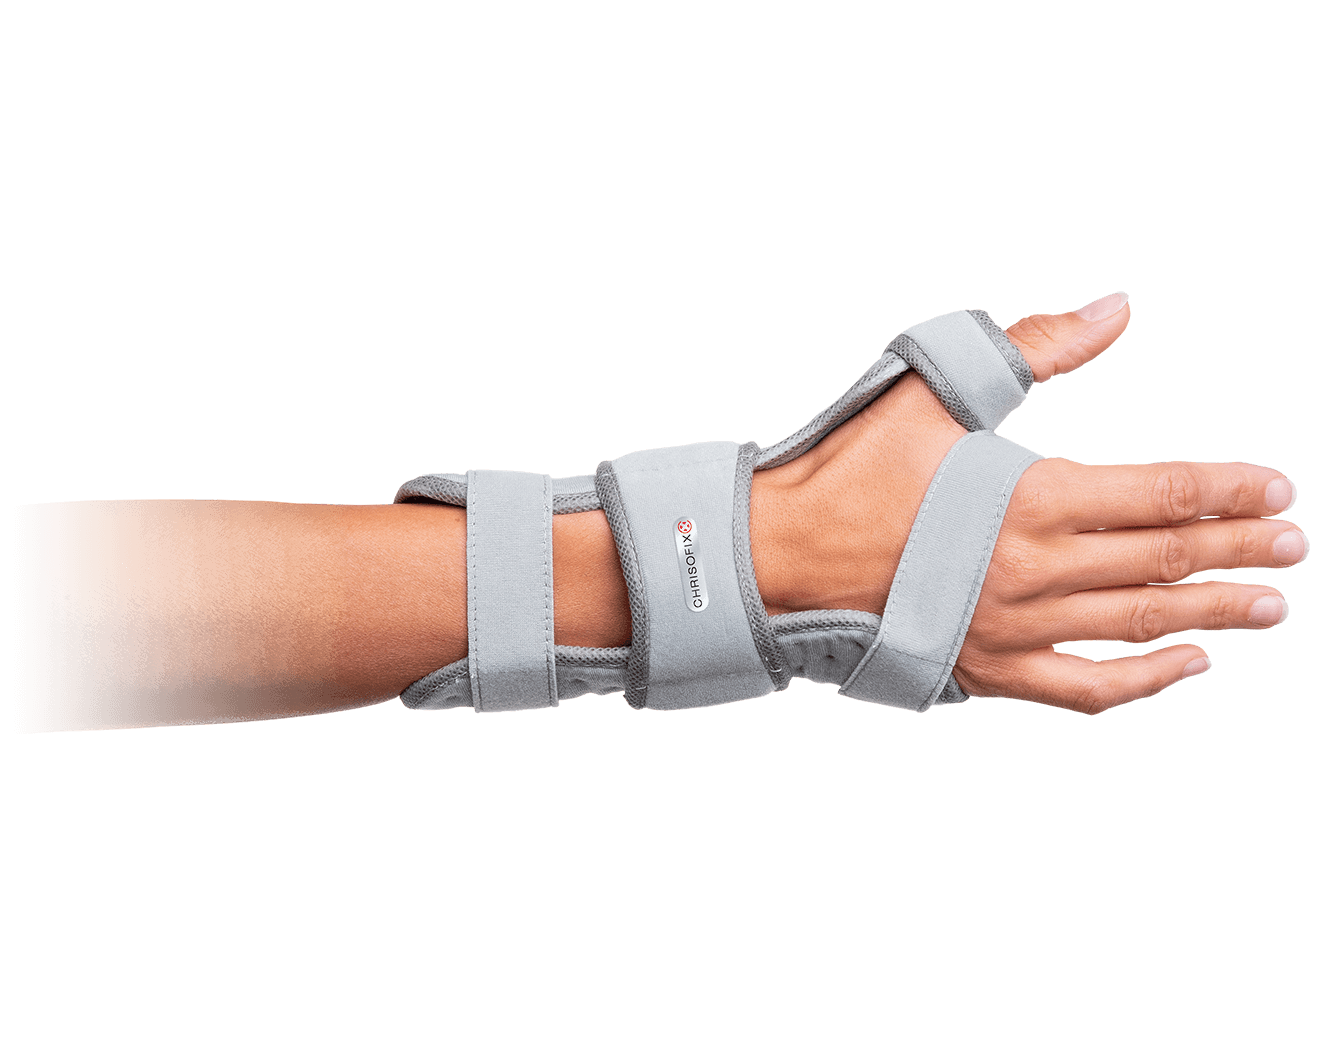 Scaphoid fracture orthosis